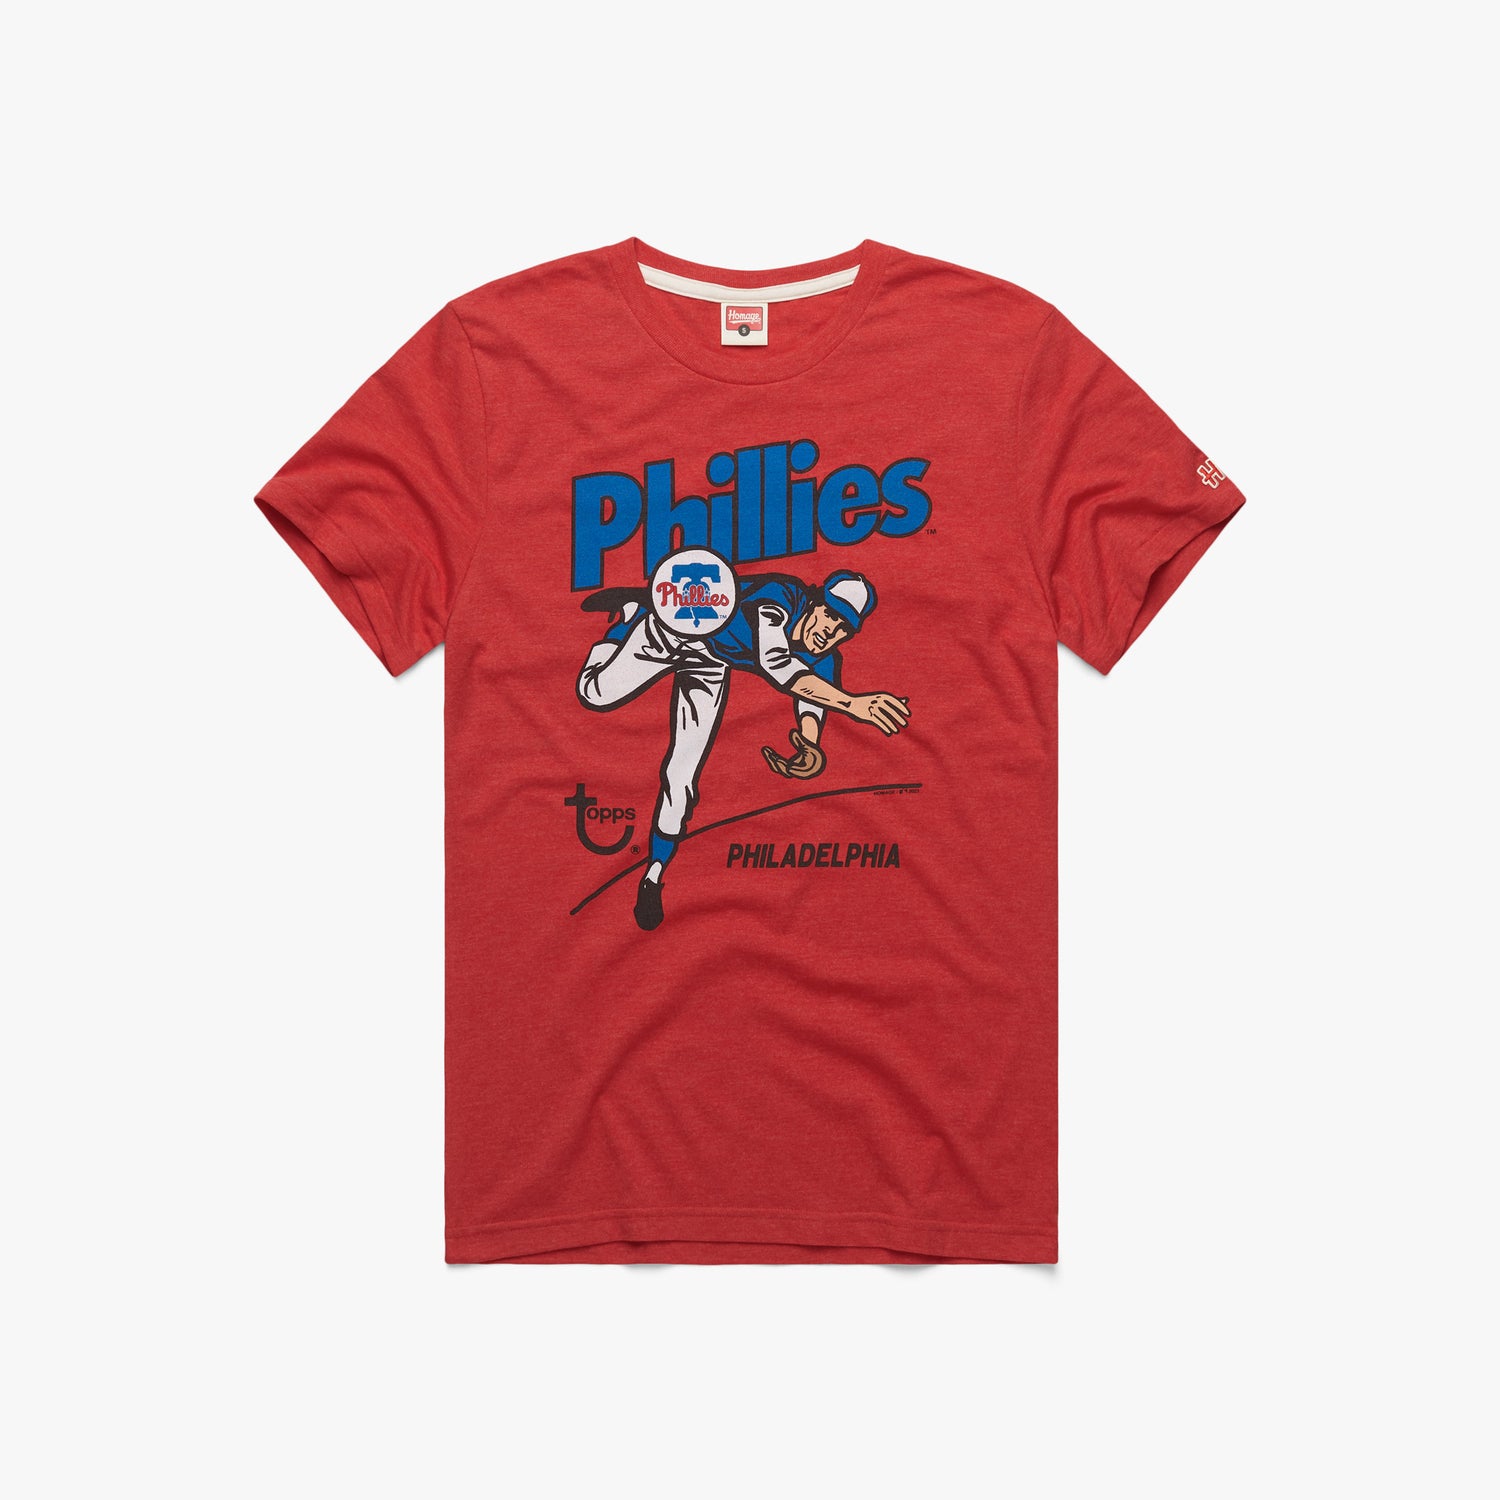 MLB x Topps Philadelphia Phillies T-Shirt from Homage. | Red | Vintage Apparel from Homage.